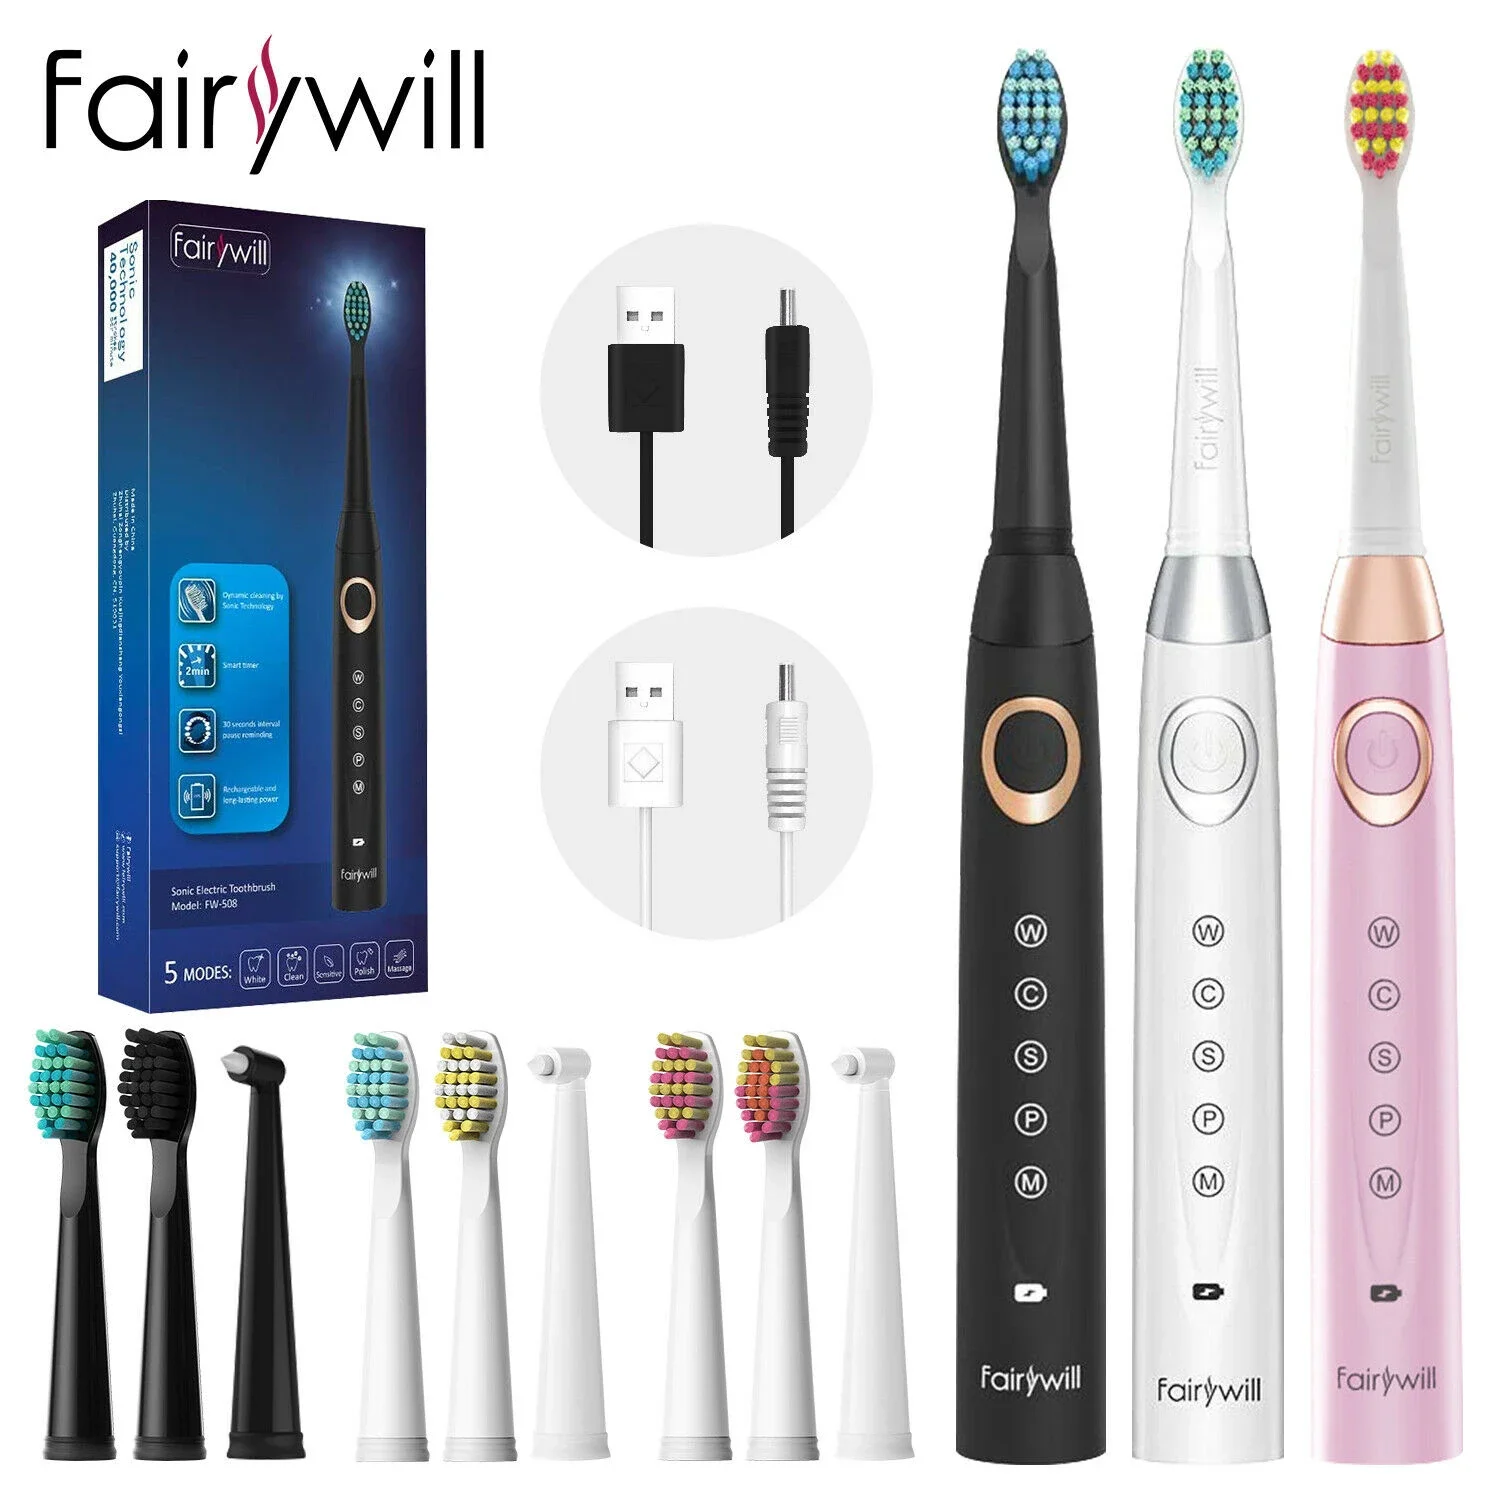 

Fairywill Electric Sonic Toothbrush FW-508 USB Charge Rechargeable Waterproof Electronic Tooth Replacement Brush Heads for Adult